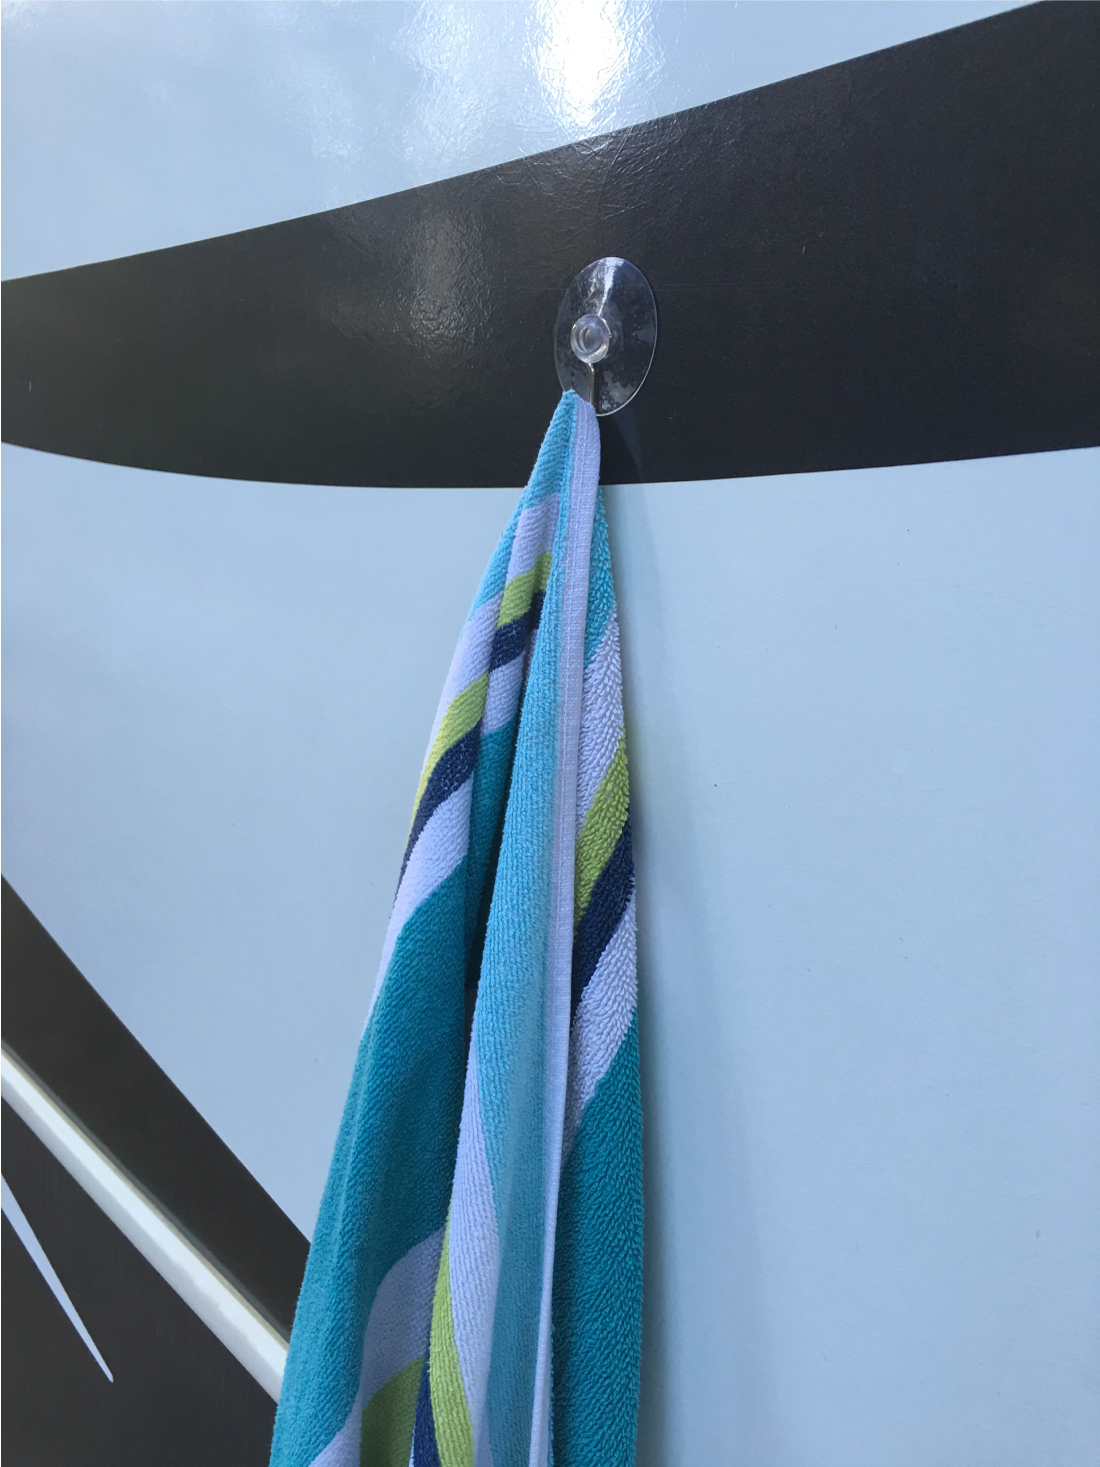 Hang towels on the RV with suction cup hooks